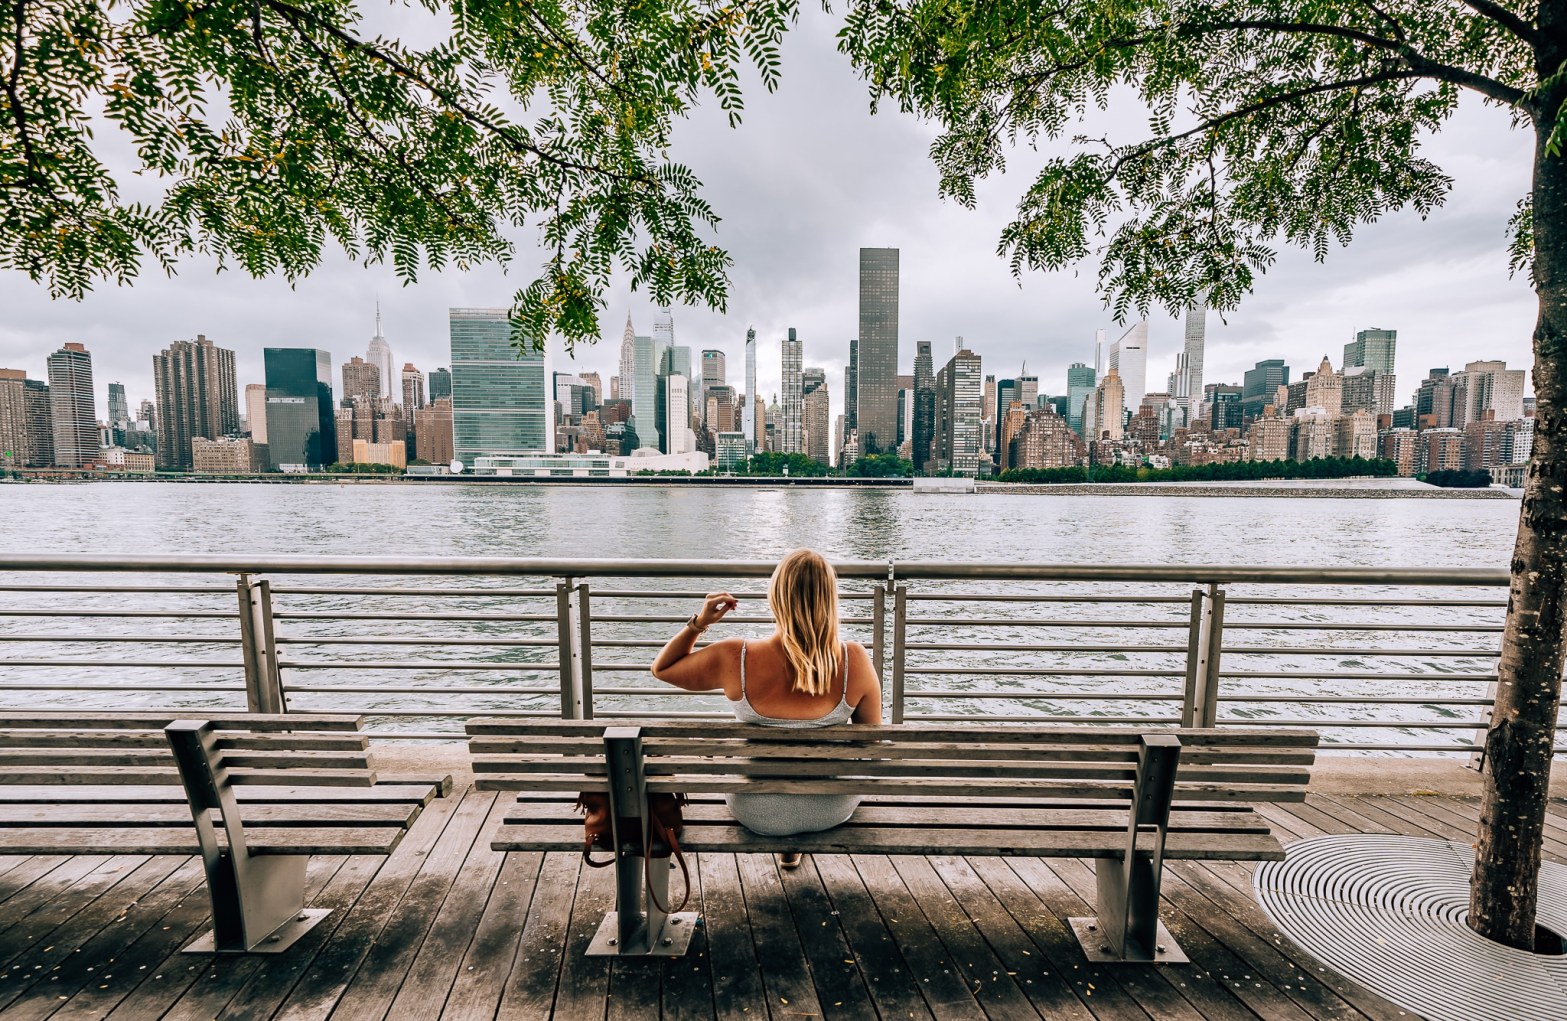 Woman sitting on a bench in Long Island City, Queens, looking out at the waterfront and Manhattan skyline